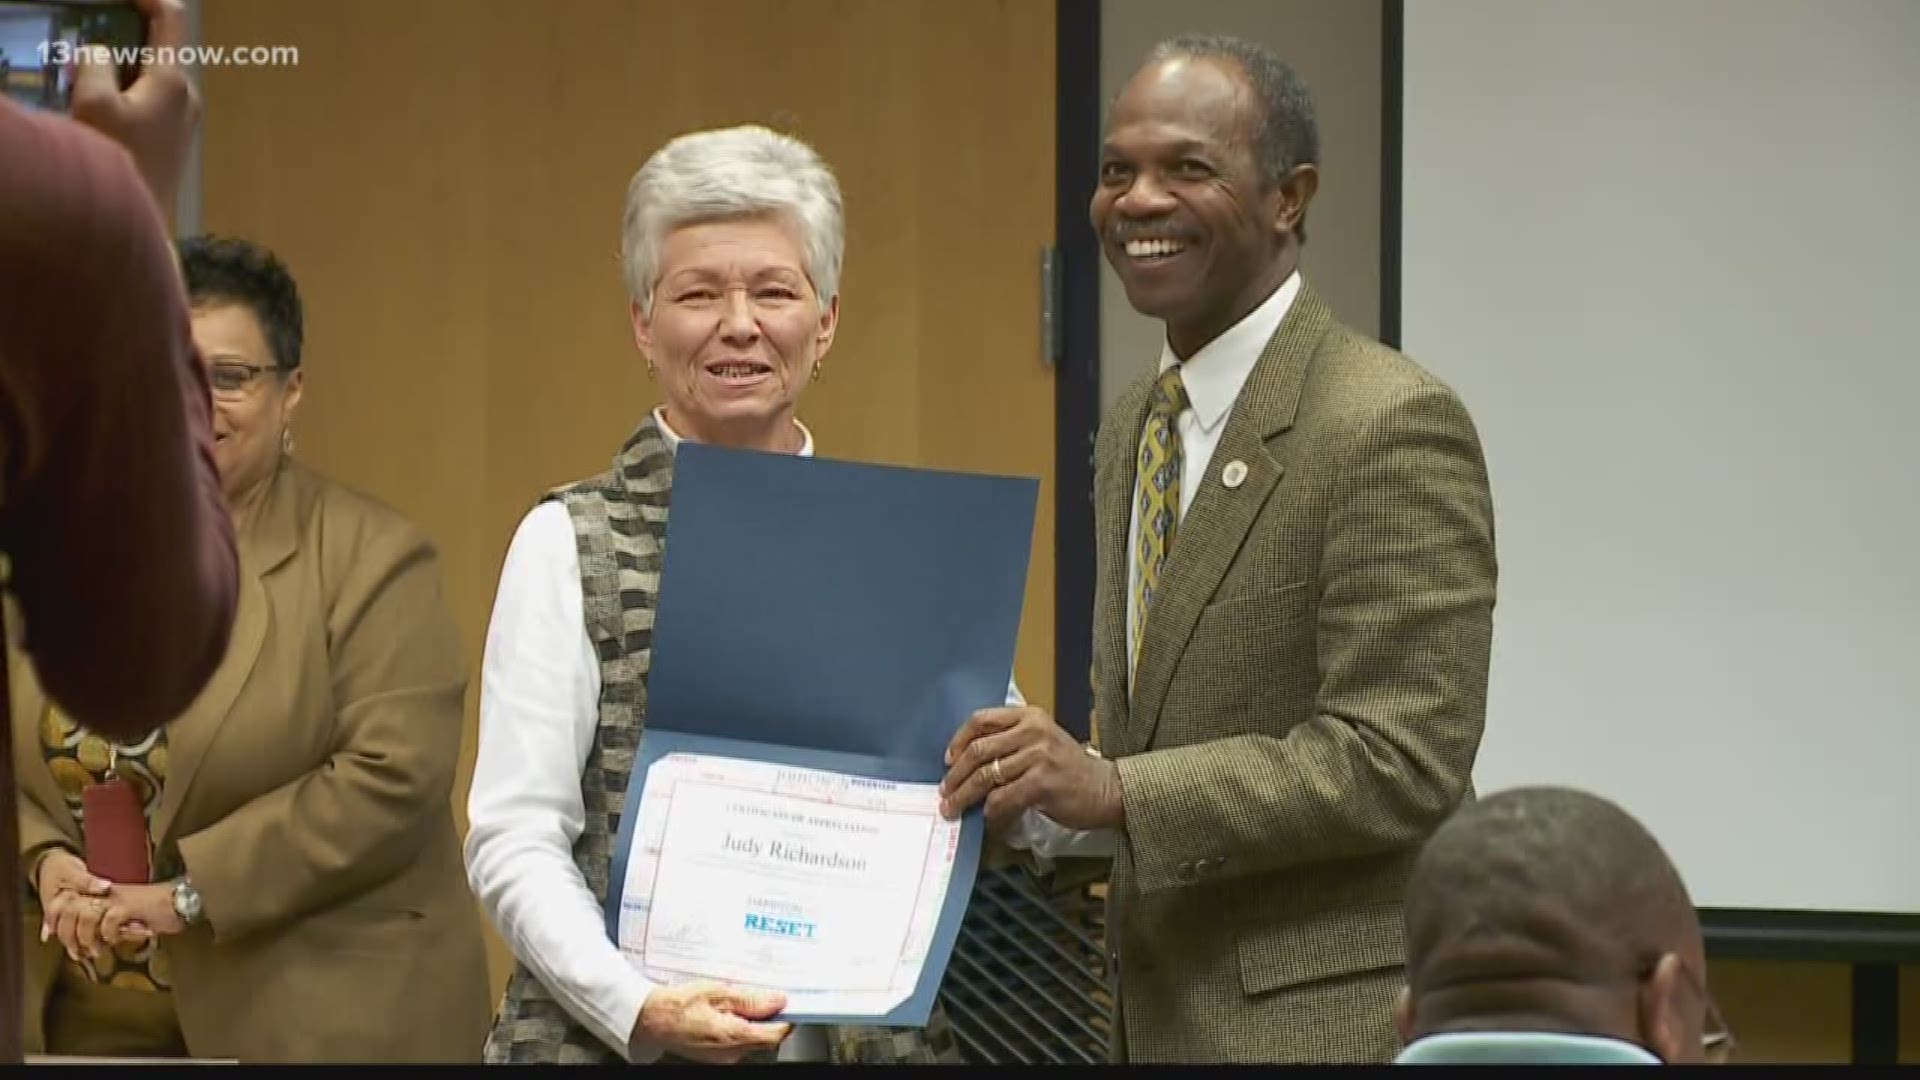 The Hampton Police Department recognized citizens who have stepped up to help in times of need.